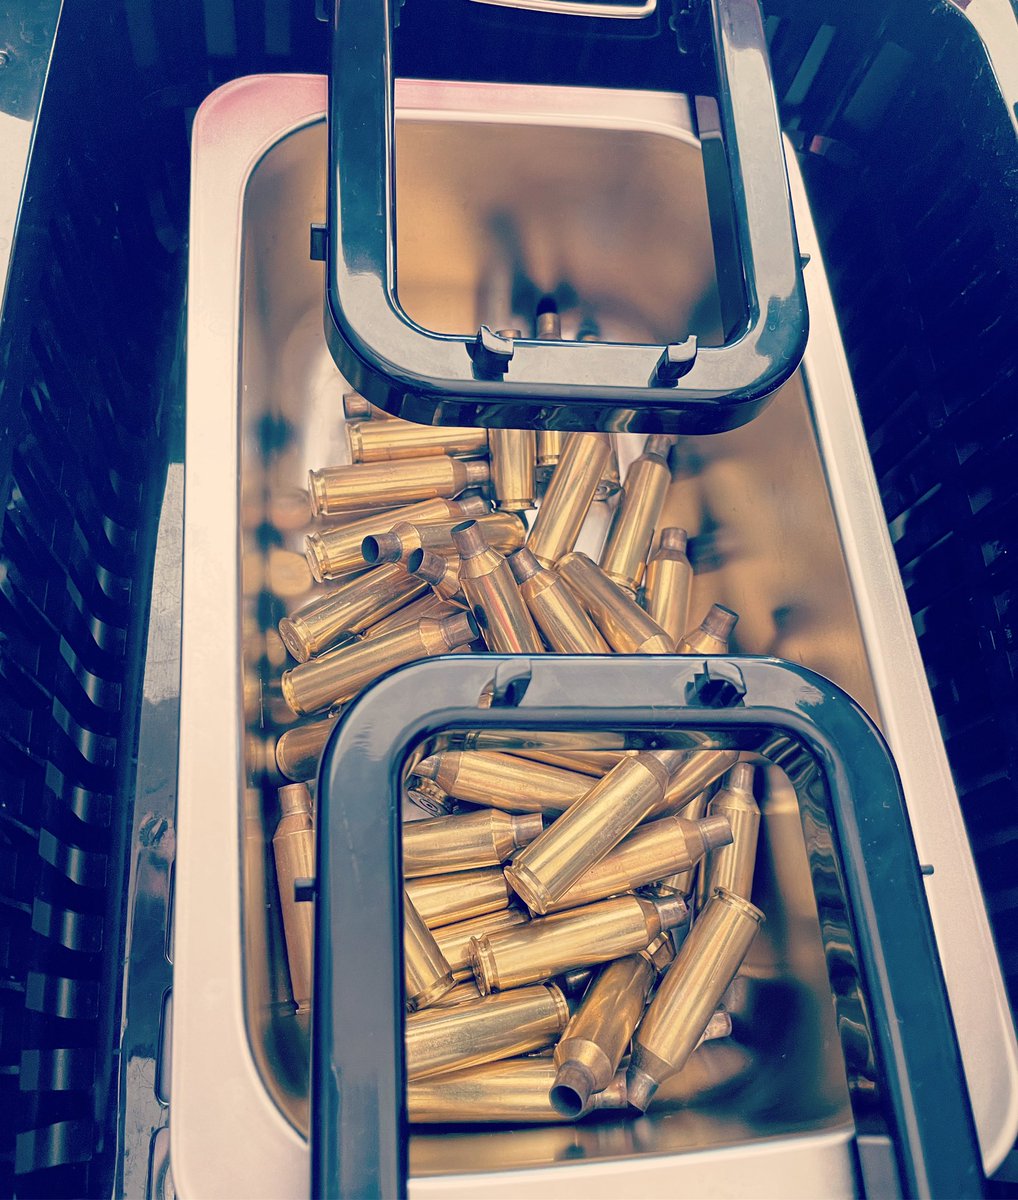 Time to clean some brass today…

#65prc #reloading #reloadingbullets #backcountryhunting #precisionhunting #precisionshooting #longrangehunting #ar10